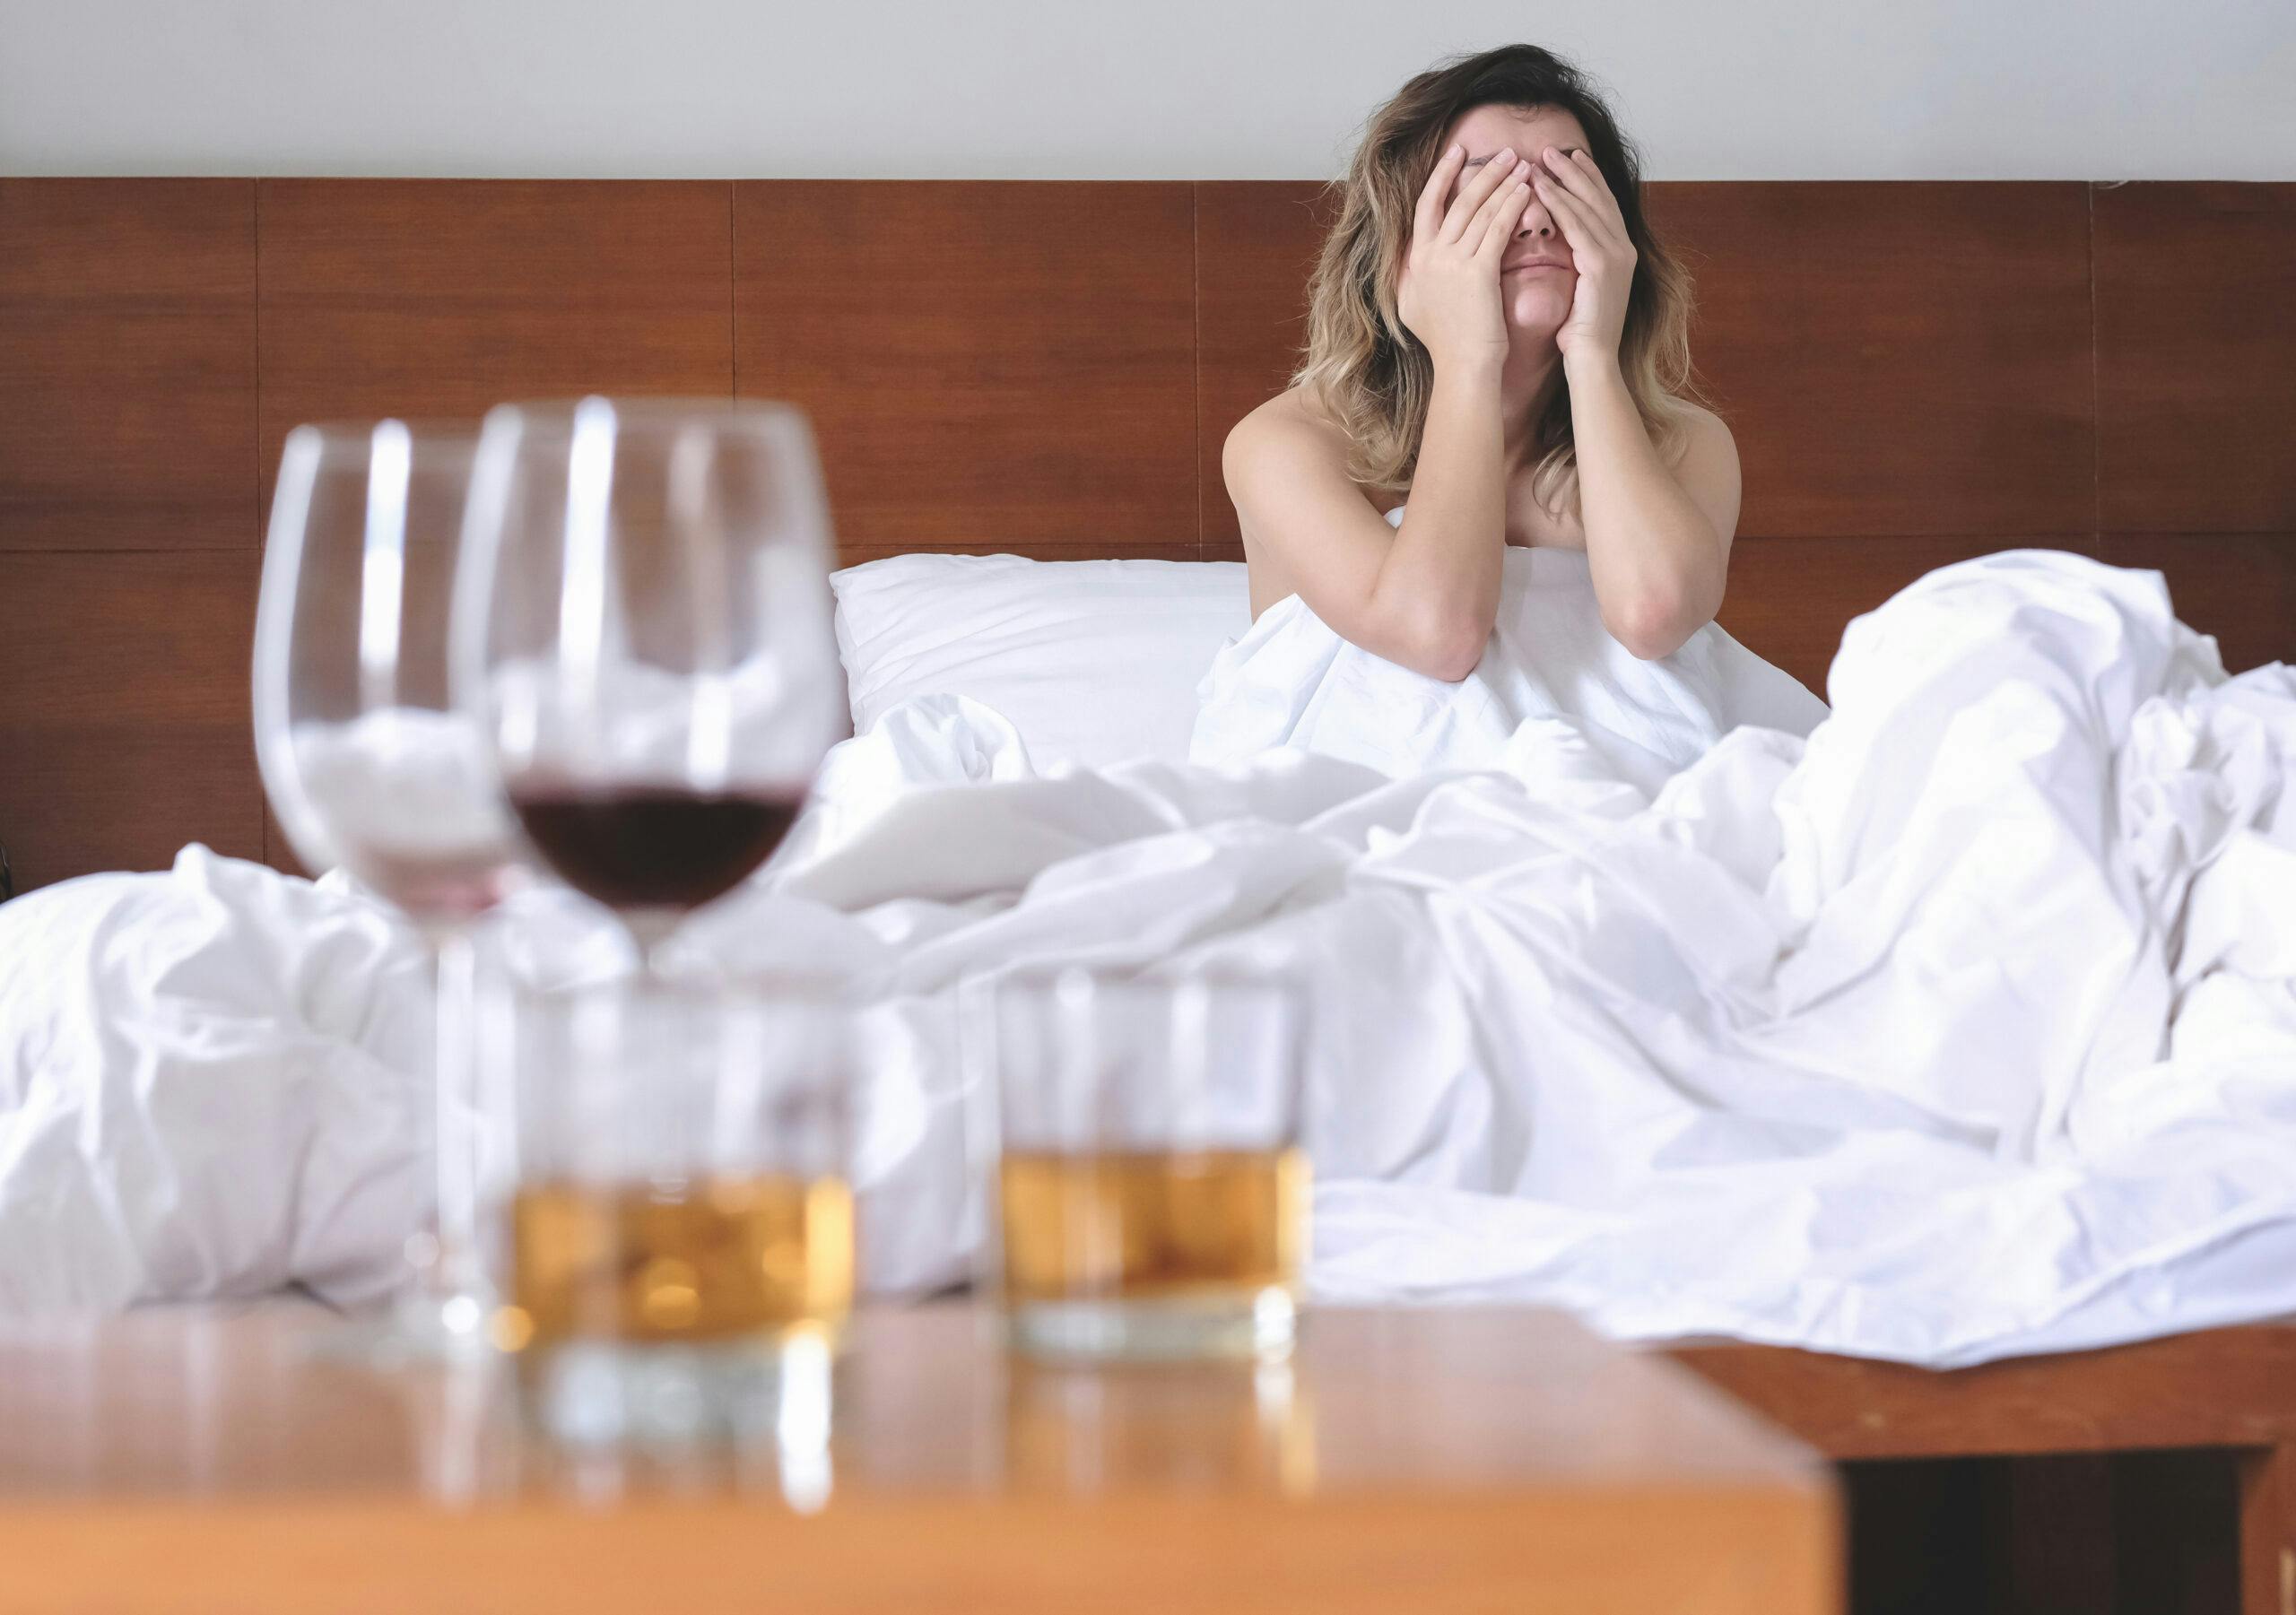 young woman waking up in hotel bed with liquor and wine glasses hungover